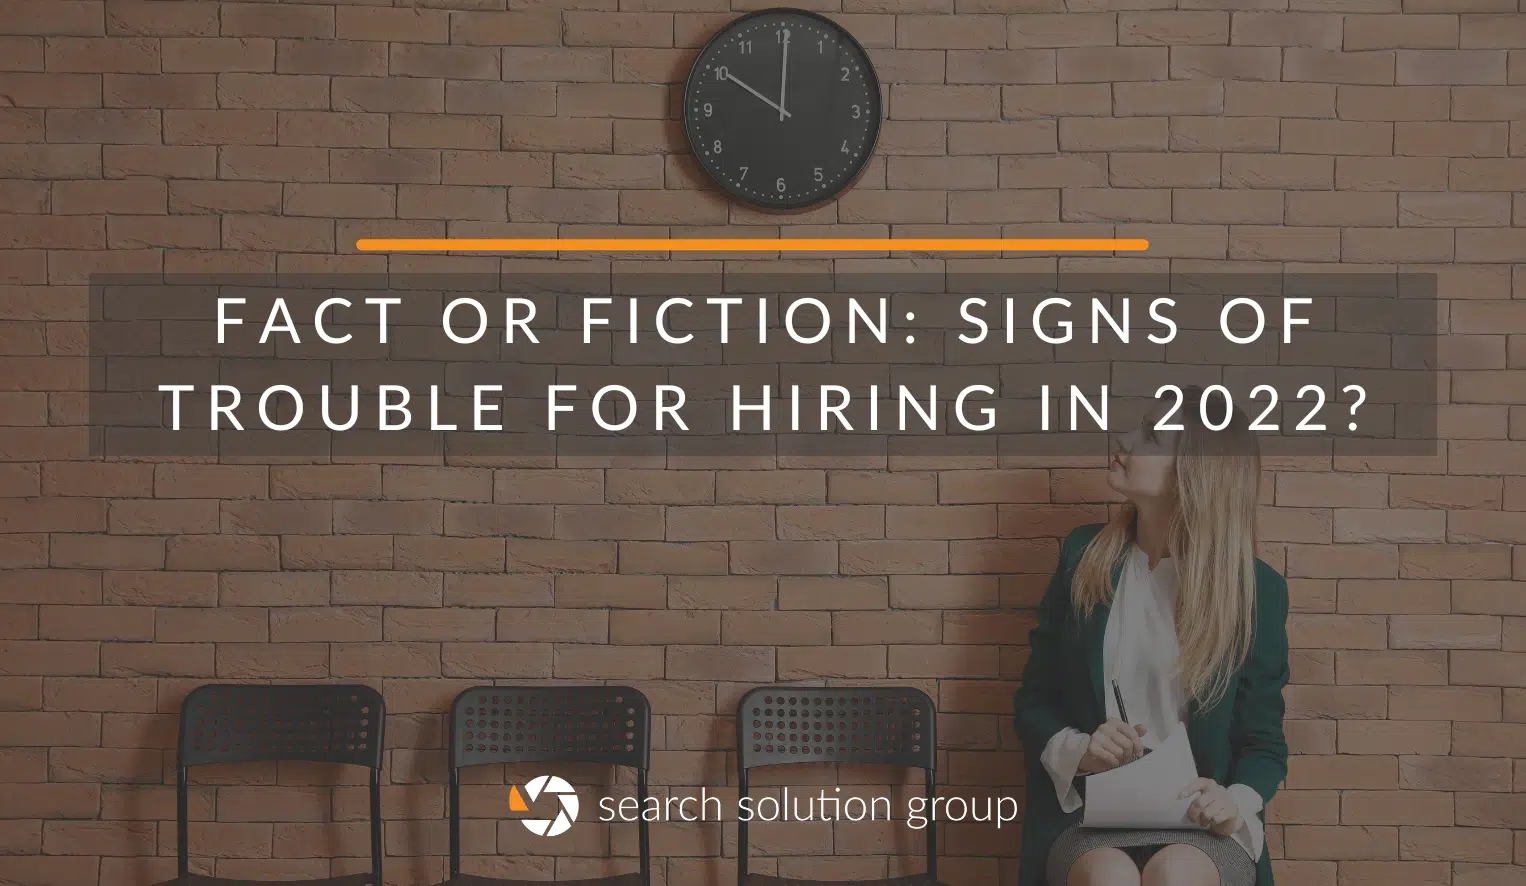 Fact or Fiction: Signs of Trouble for Hiring in 2022?